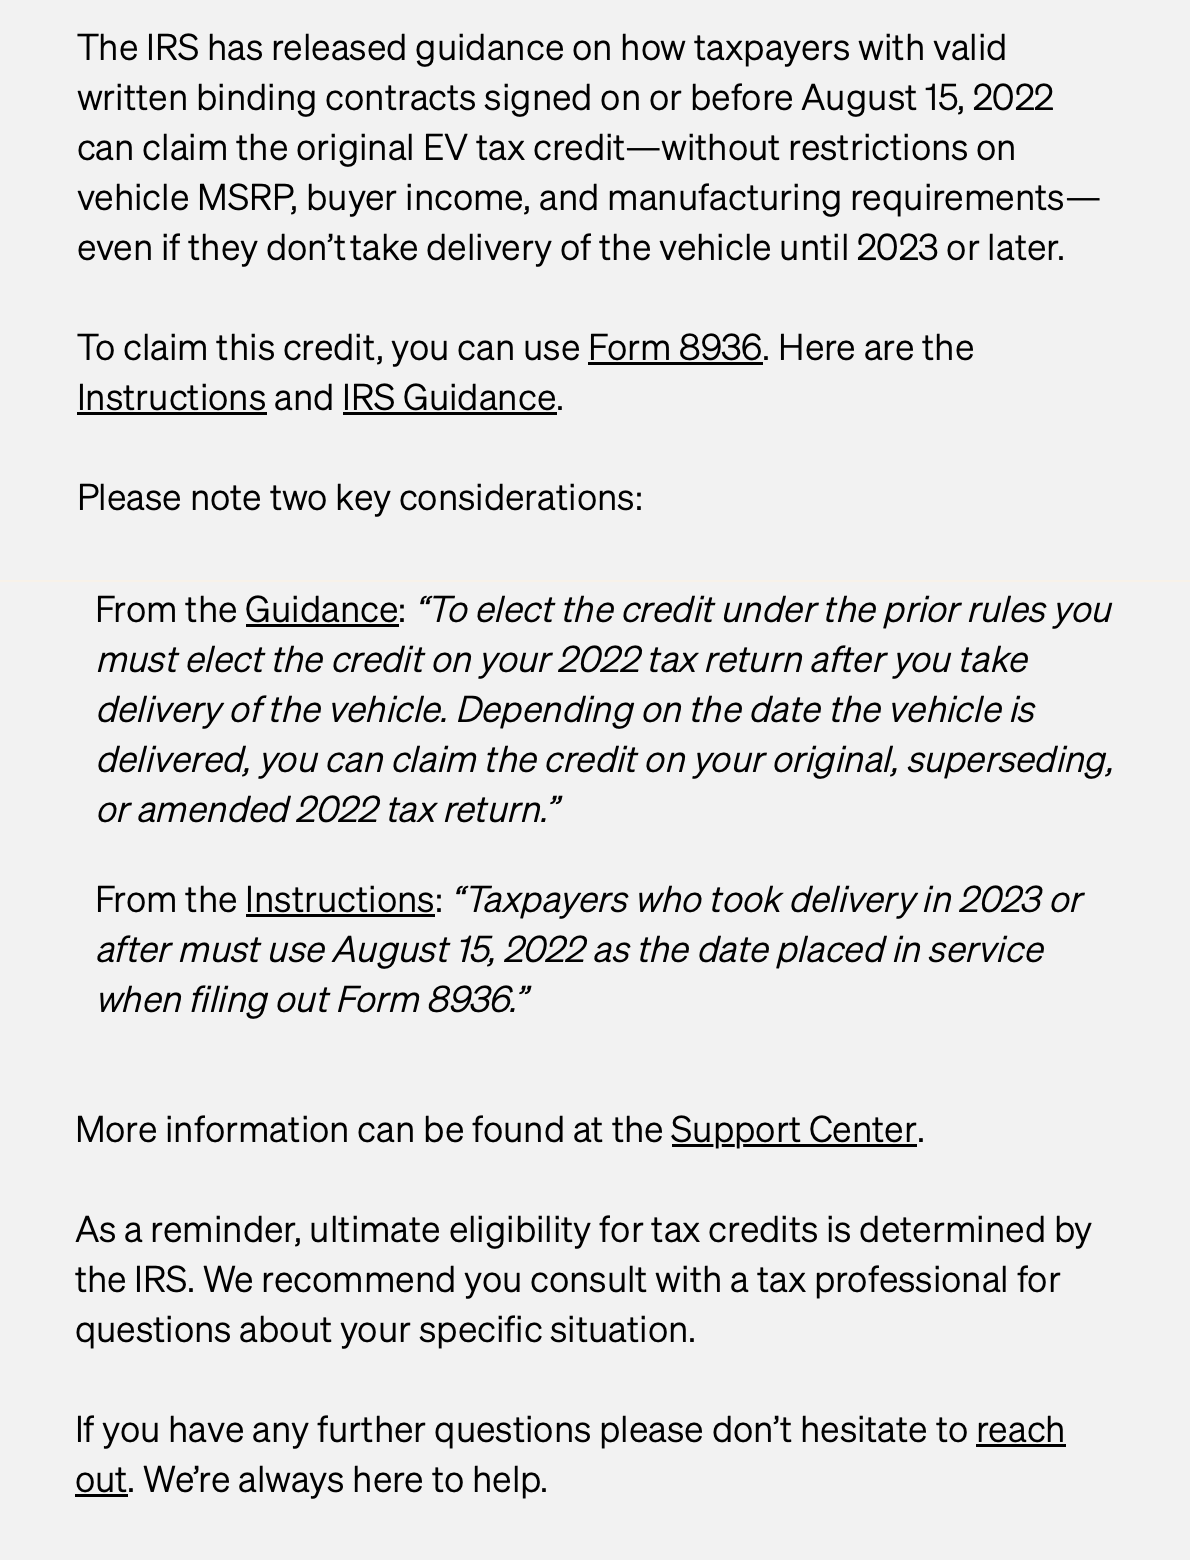 Rivian R1T R1S Rivian posts updated IRS guidance for BPA + Instructions to claim EV Tax Credit Screenshot 2023-03-08 at 2.12.27 PM